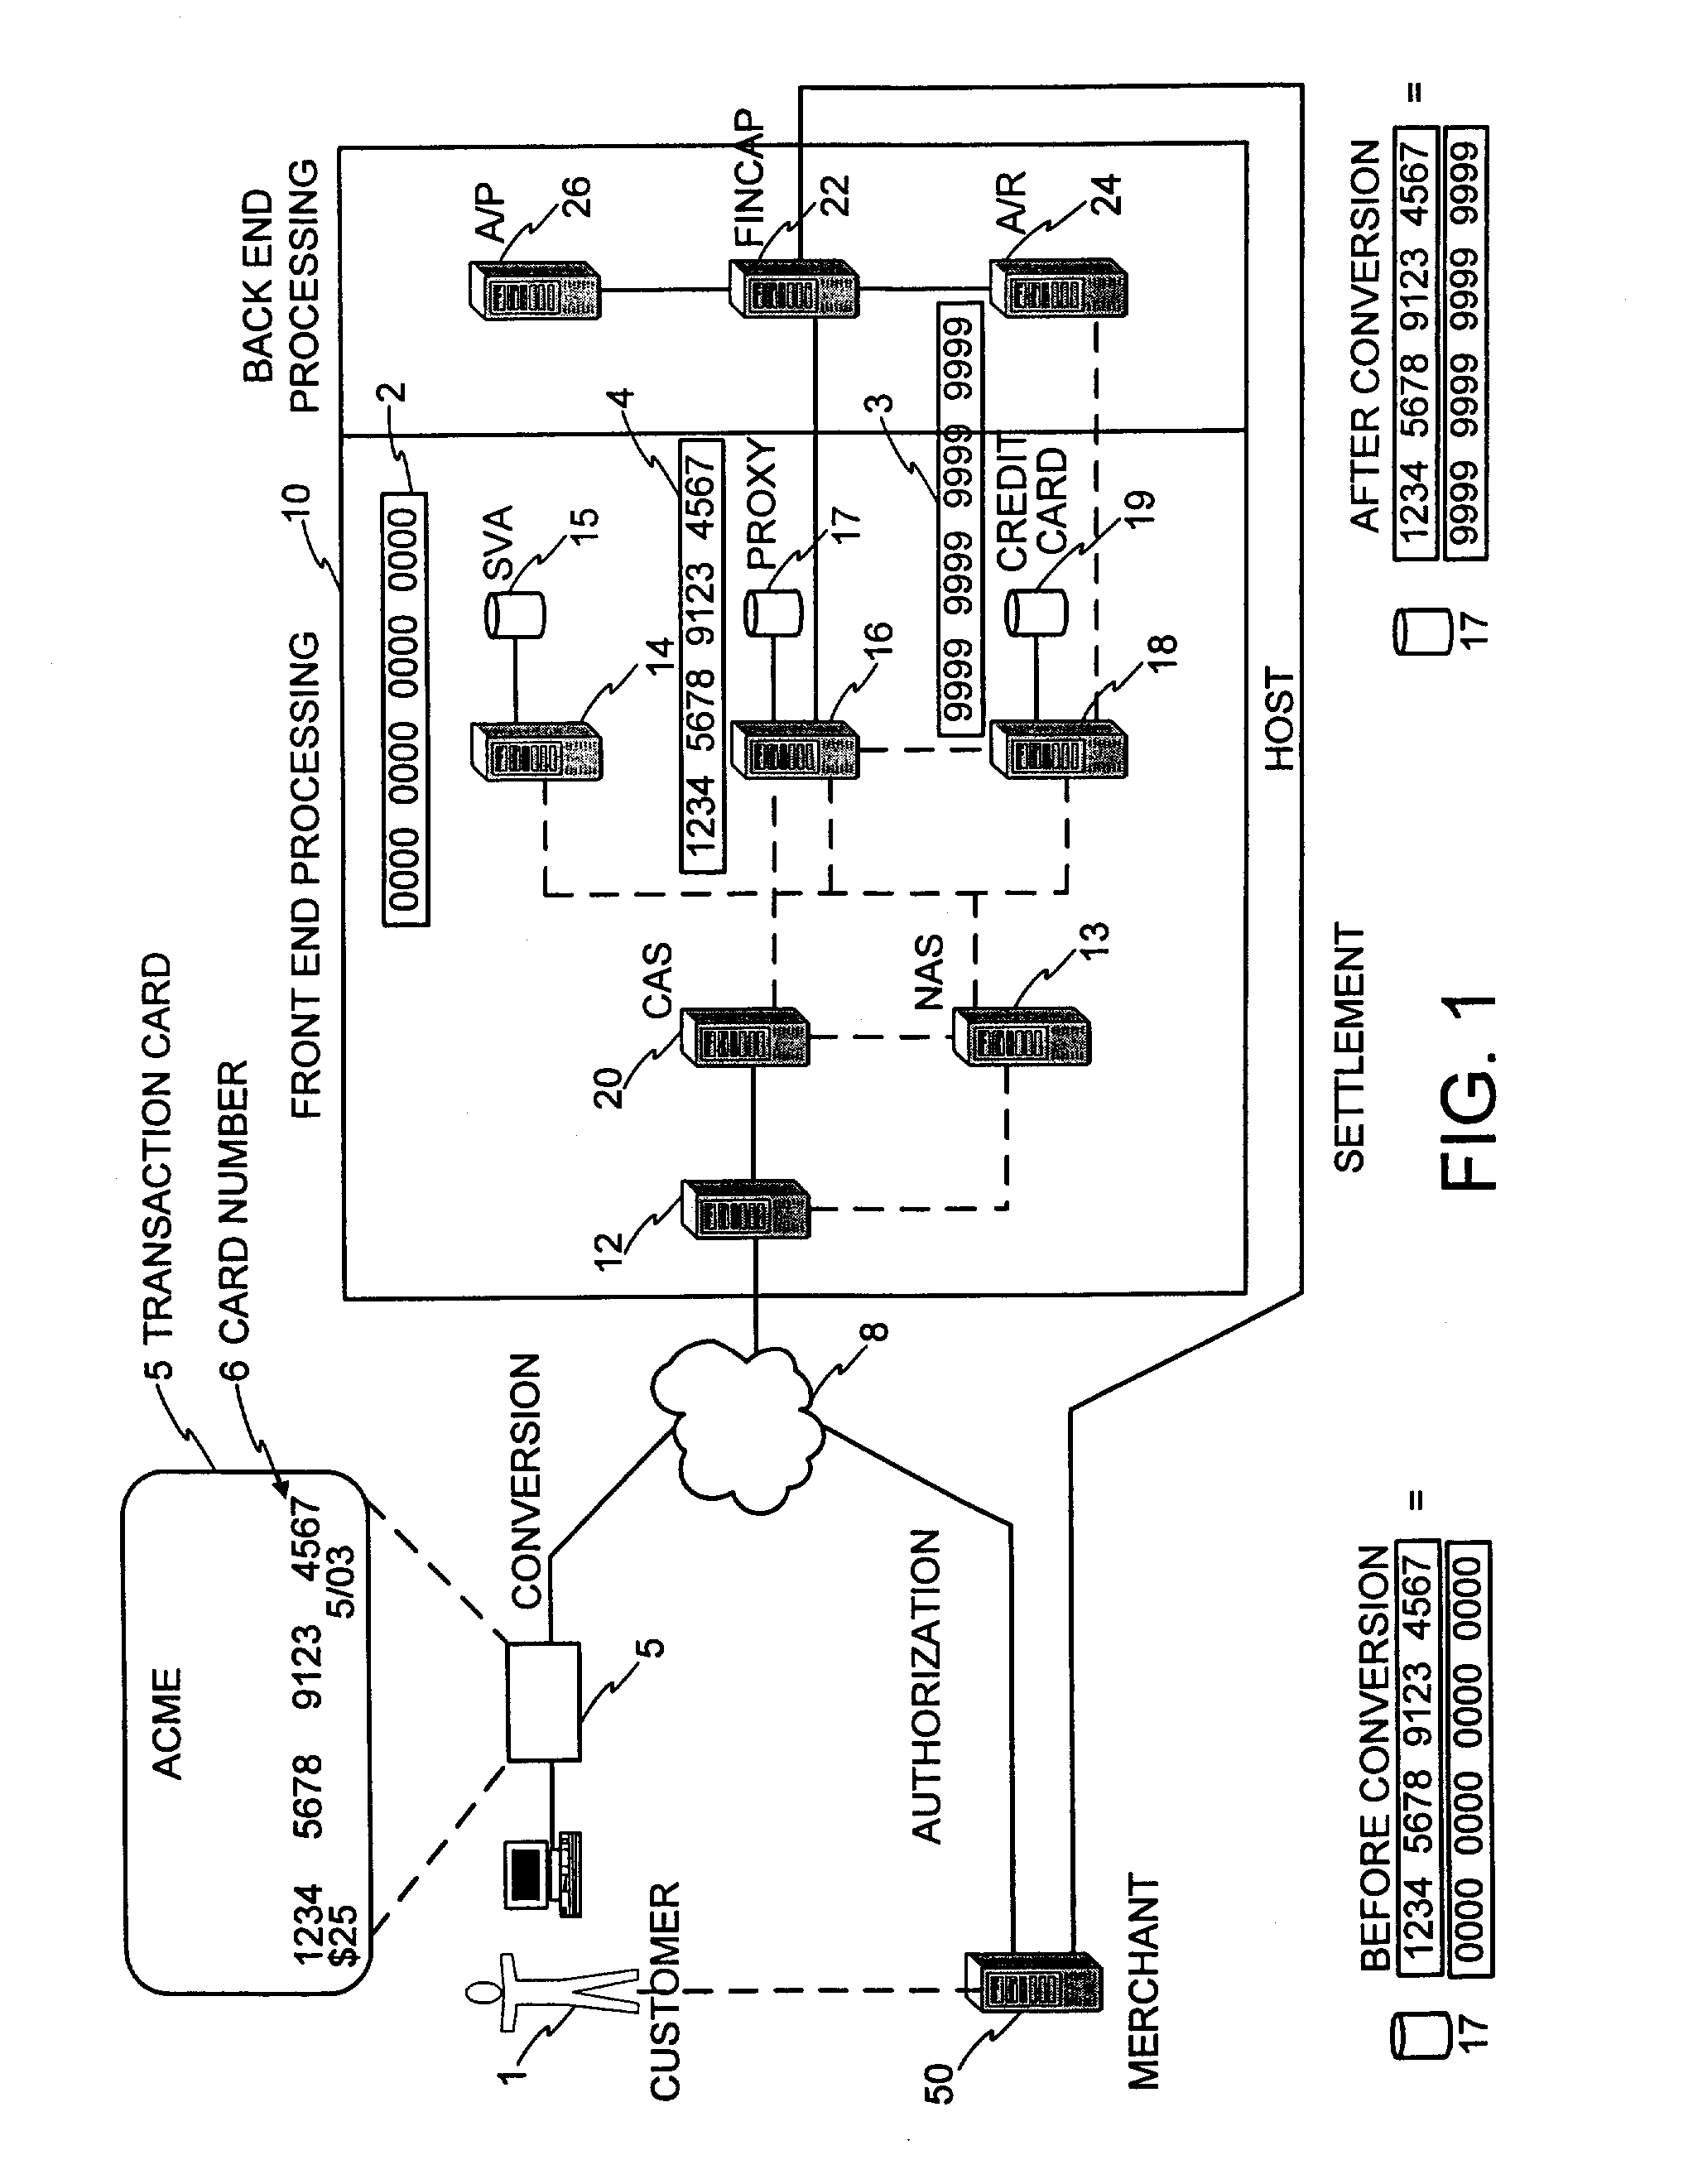 System and method for re-associating an account number to another transaction account